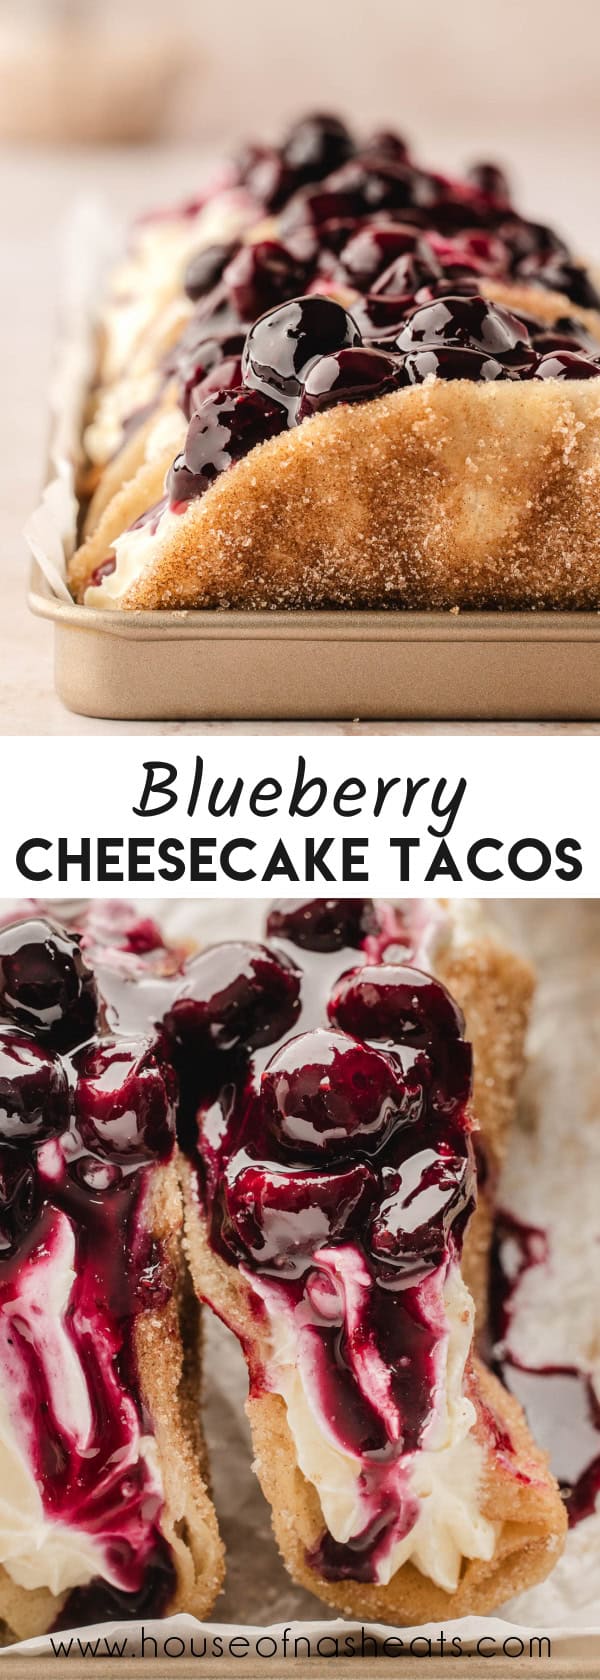 A collage of images of blueberry cheesecake dessert tacos with text overlay.